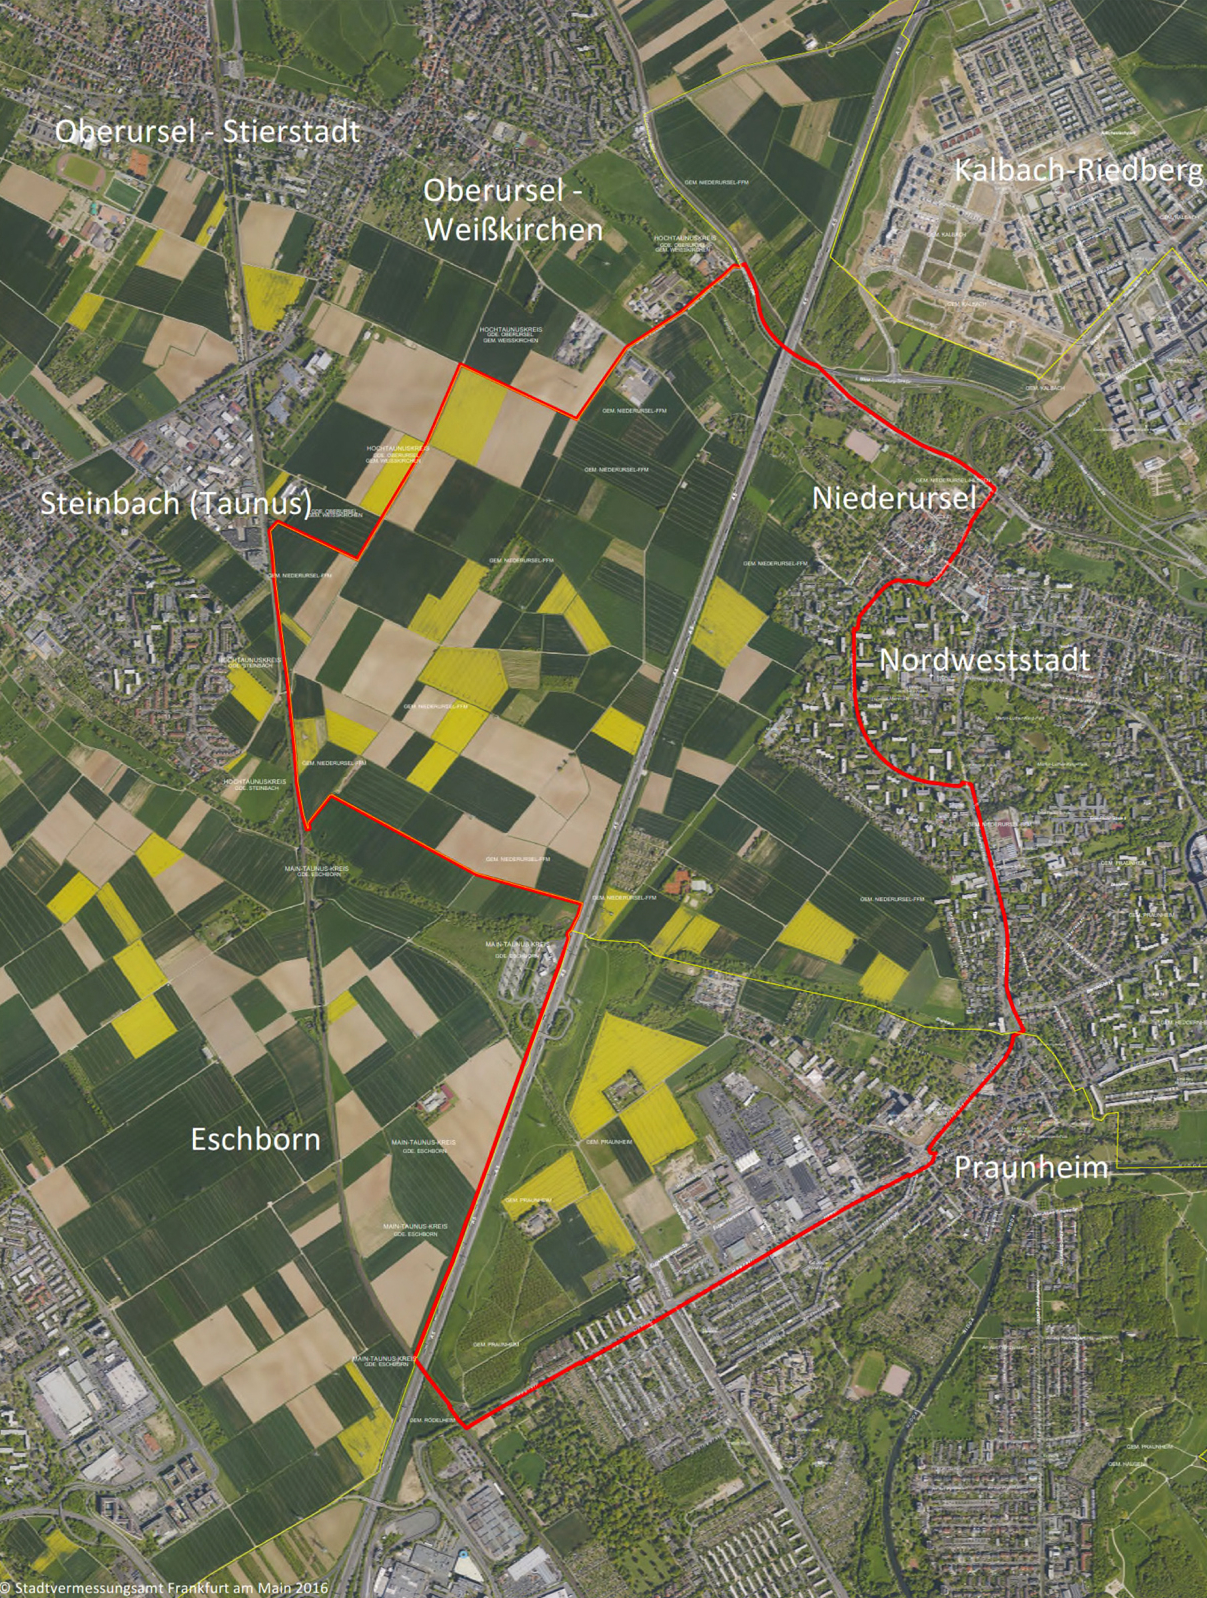 Aerial image 2016 with the boundaries of the area of the preparatory studies, © Urban Planning Office of the City of Frankfurt am Main , aerial image: Stadtvermessungsamt Stadt Frankfurt am Main 